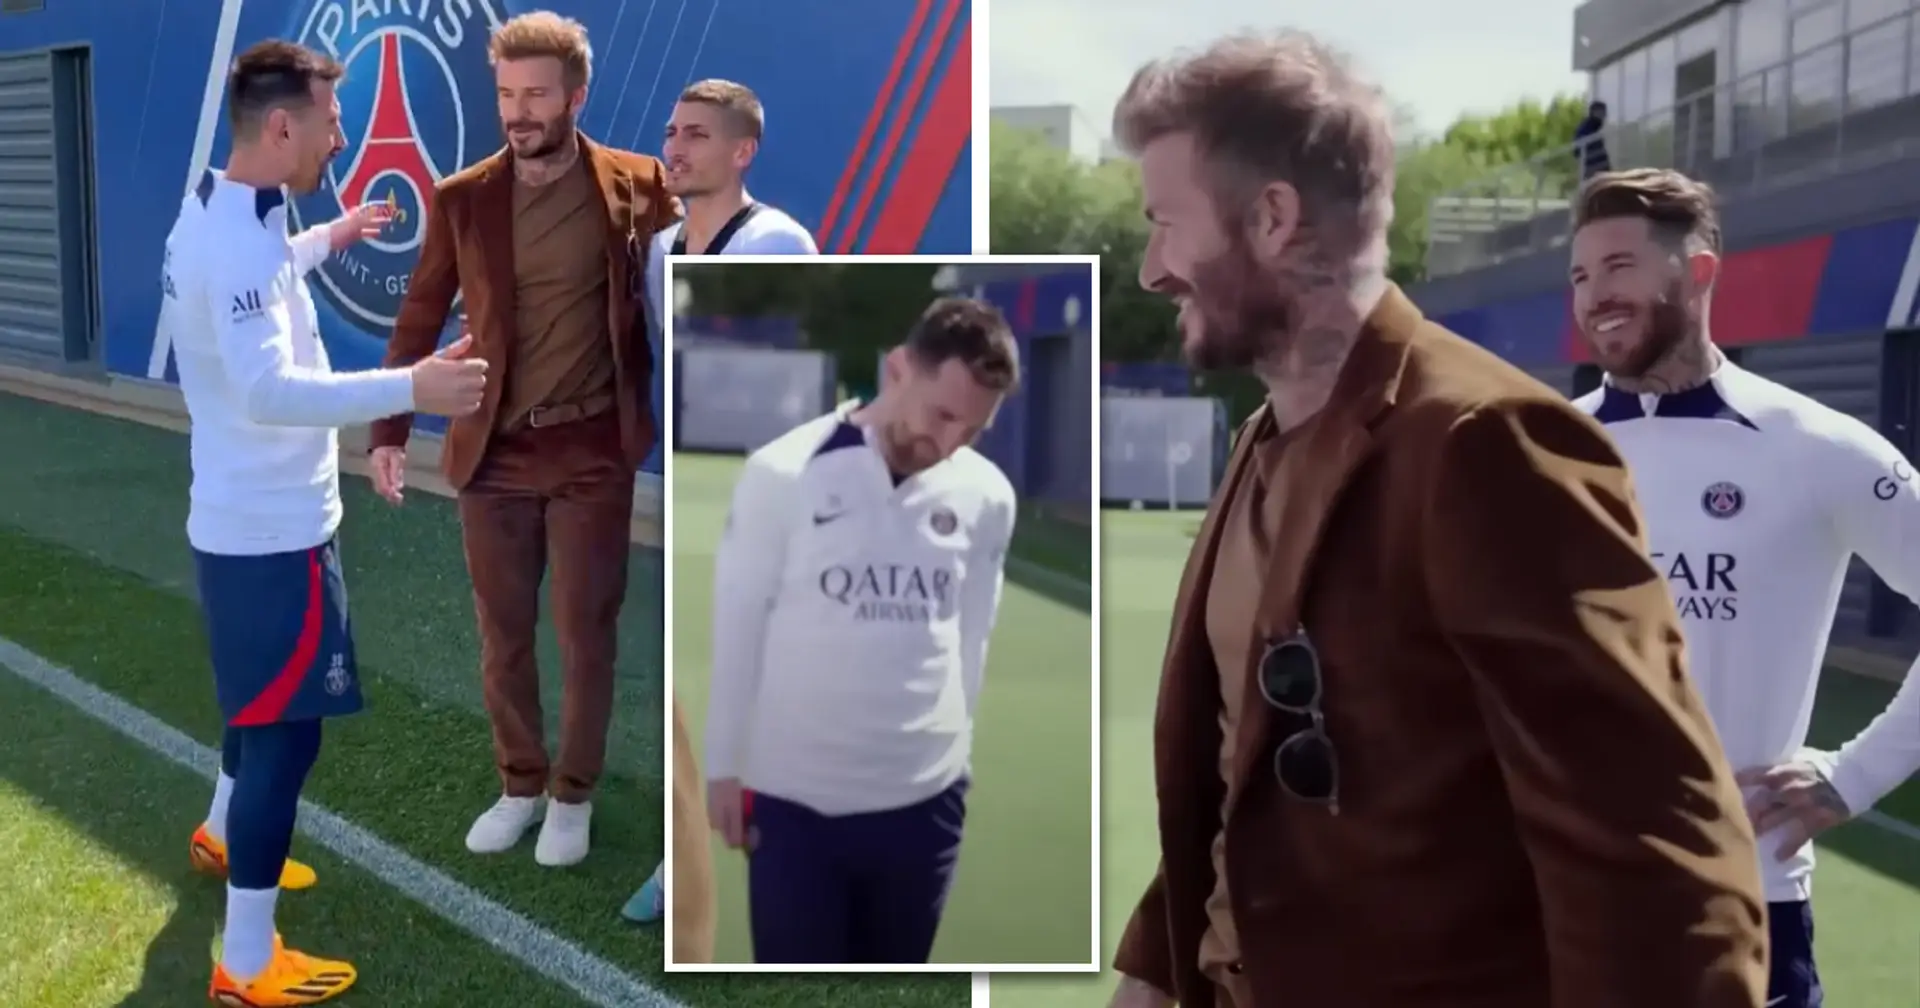 Fans claim David Beckham ignored Messi at the meeting 